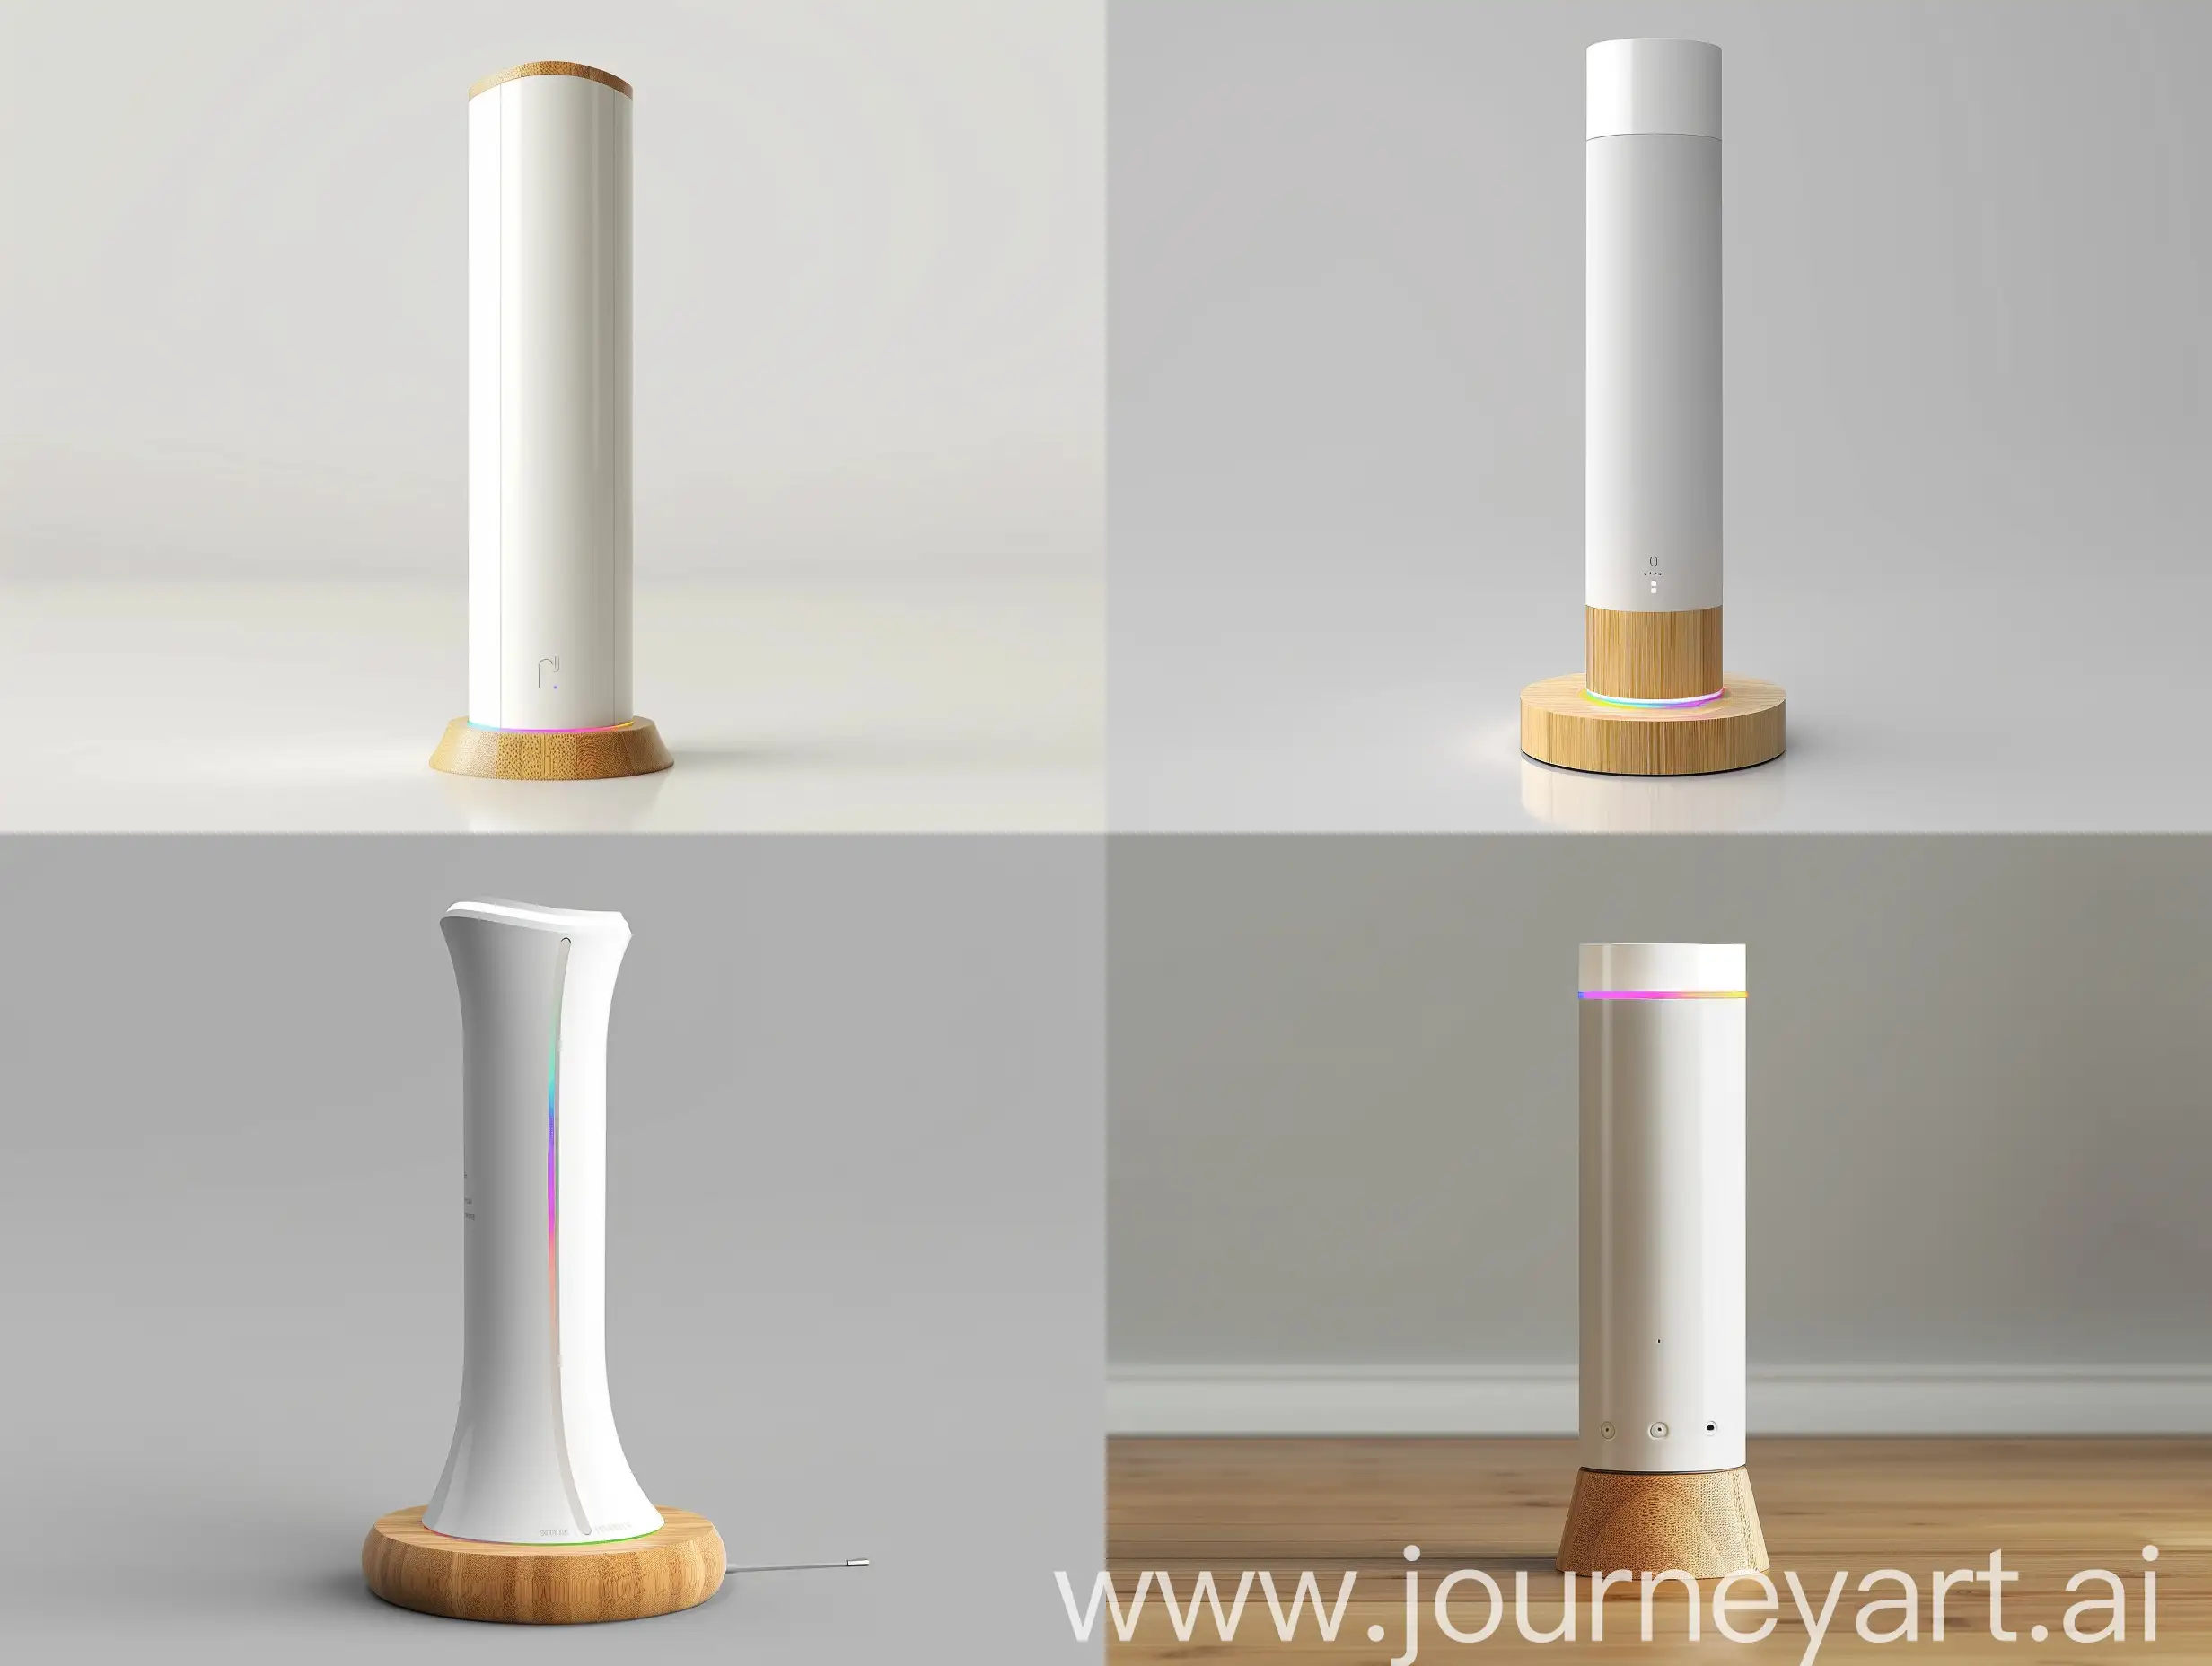 "Envision a sophisticated, eco-friendly energy management device that stands 30 cm tall, with a form gracefully tapering from an 8 cm bamboo base to a 5 cm top. The base is made of sustainable bamboo, showcasing a commitment to environmental sustainability, while the body is crafted from premium recycled plastics in a serene white or light gray, embodying modern minimalism. A discreet touch-sensitive strip is ingeniously integrated midway up the body for intuitive control, maintaining the device's sleek silhouette. At the top, an innovative white color LED light tag wraps around the edge, offering ambient lighting and colorful notifications. Small, hidden speakers near the top provide audio feedback, complementing the tactile interaction. The device is powered via a USB-C port at the bamboo base's rear, with a concealed wire for a clean aesthetic. Inside, a durable battery ensures reliability, embodying the perfect blend of functionality, sustainability, and minimalist design. This device transforms smart home energy management into an art form, harmonizing with the decor while promoting a sustainable lifestyle."realistic style